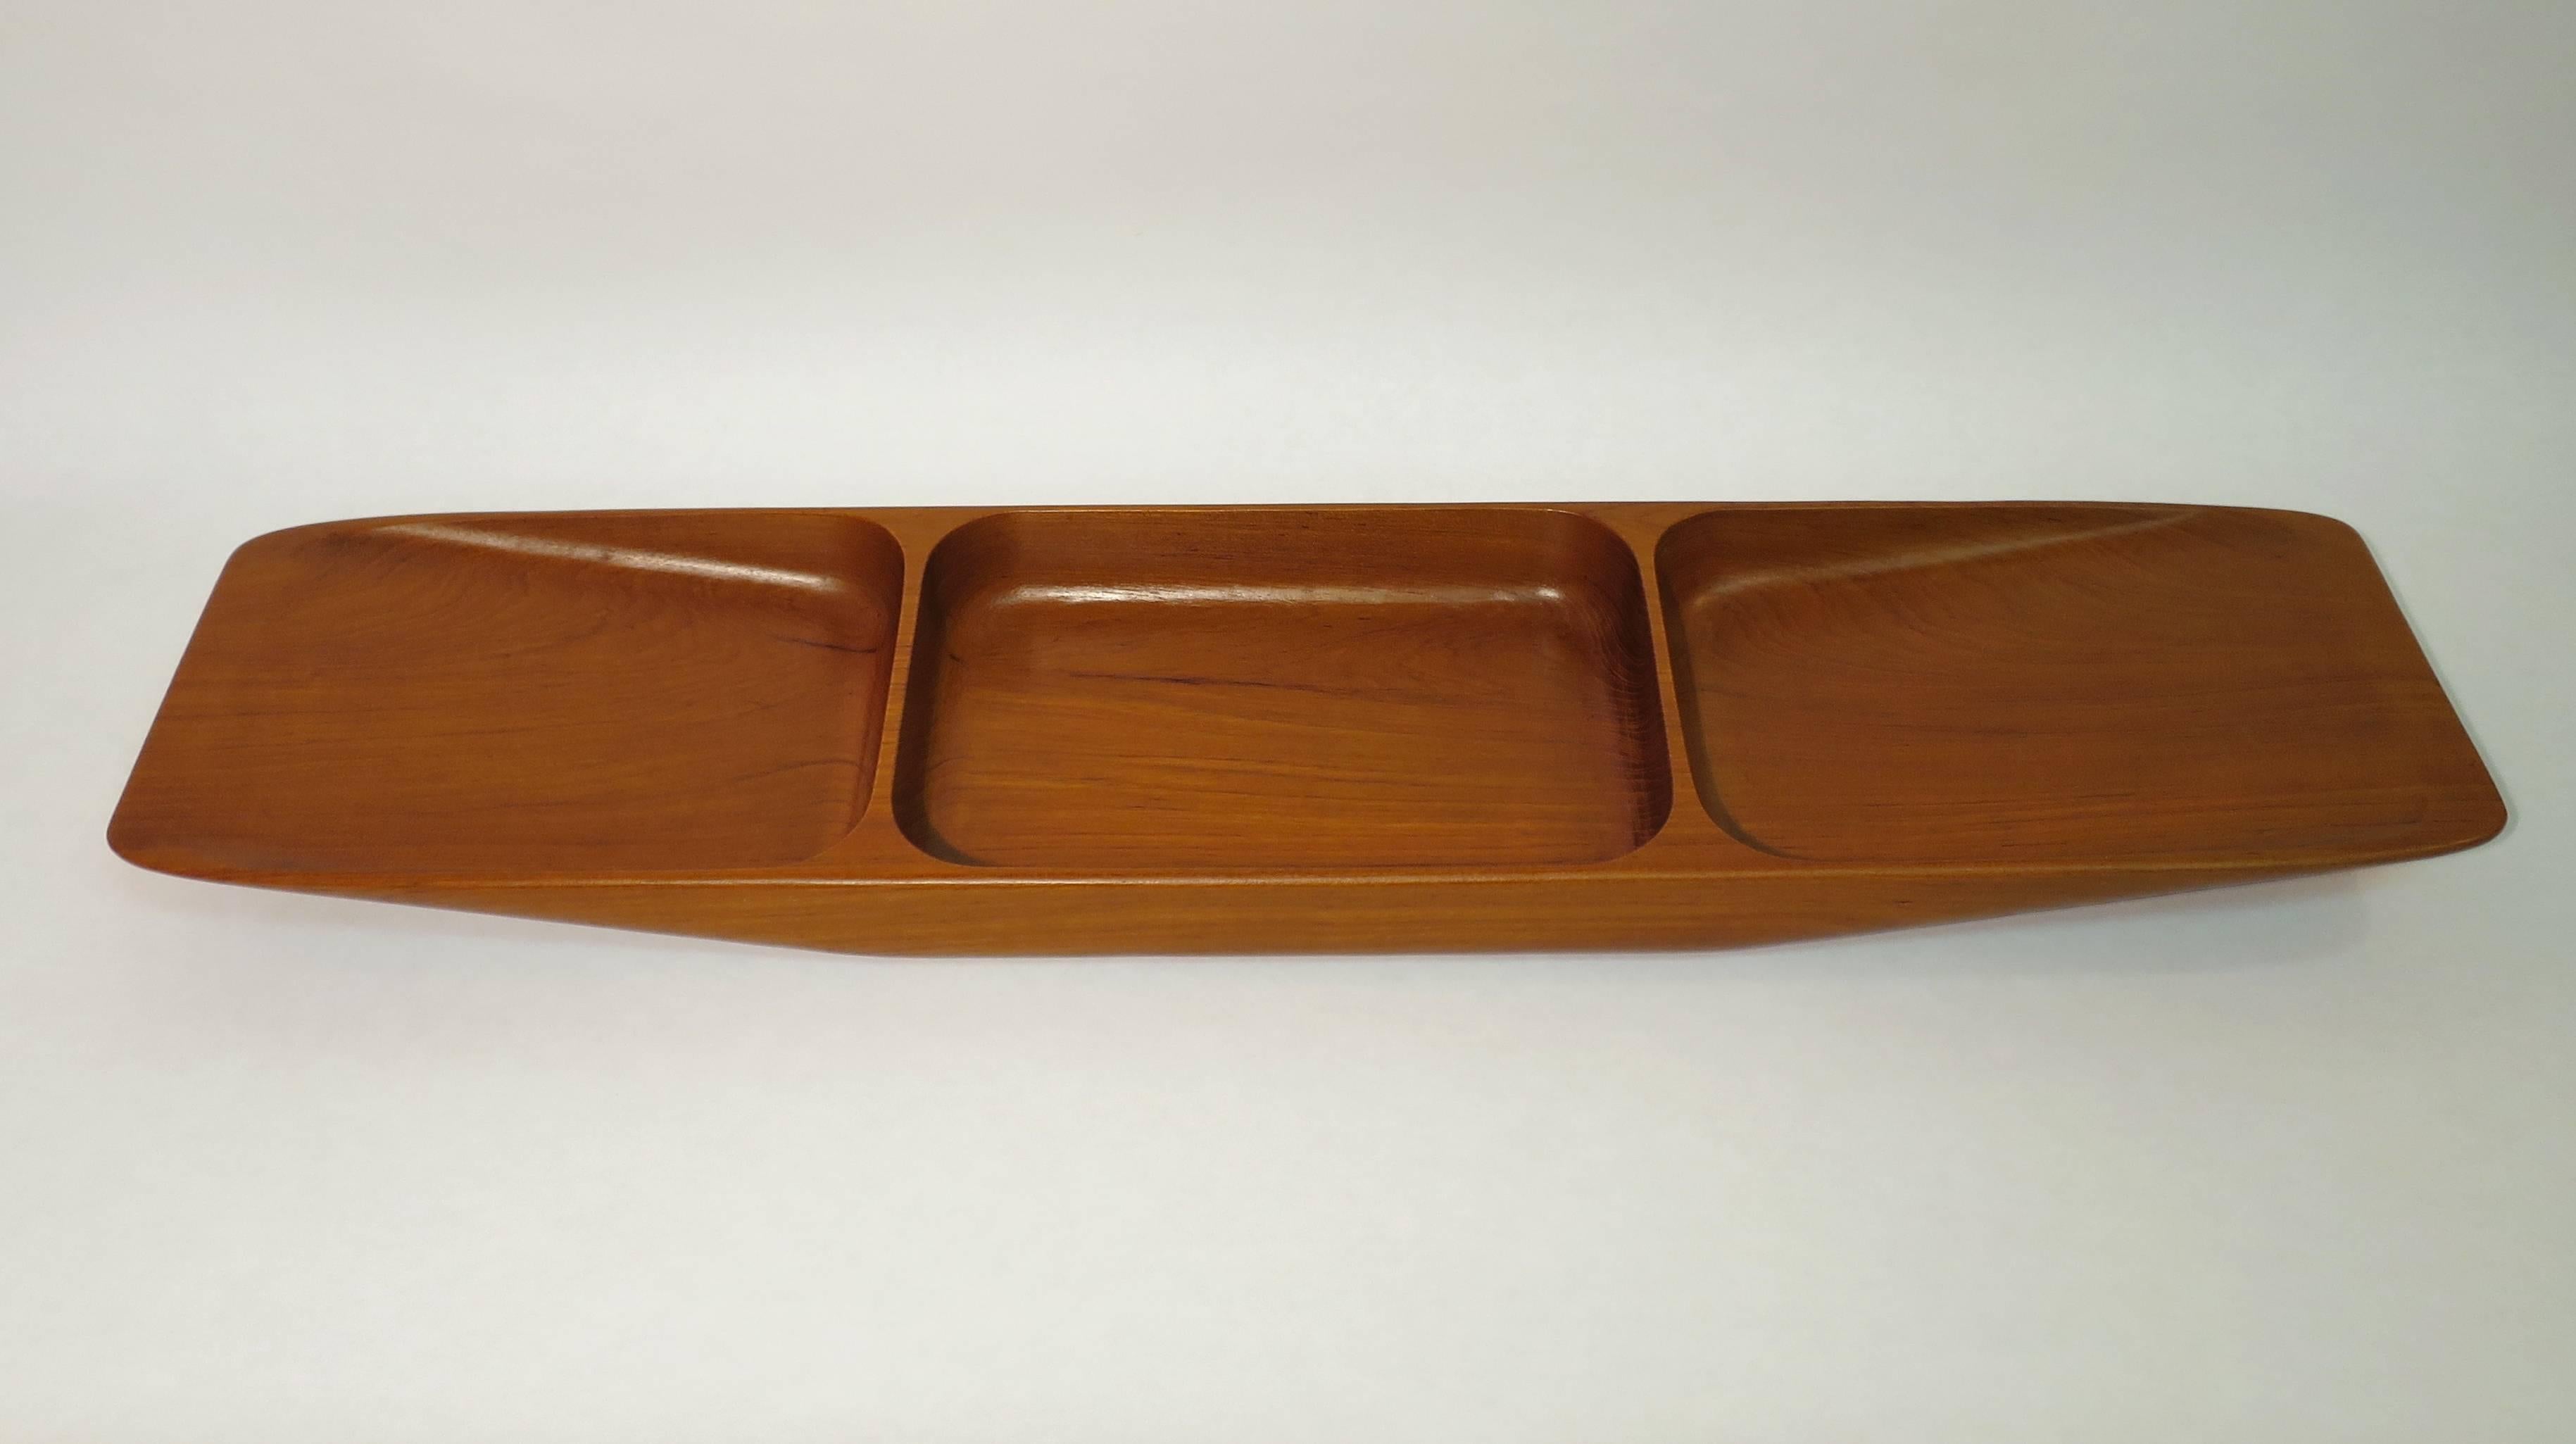 Large solid teak tray by Sowe Konst. Excellent condition. Measures: 30.75